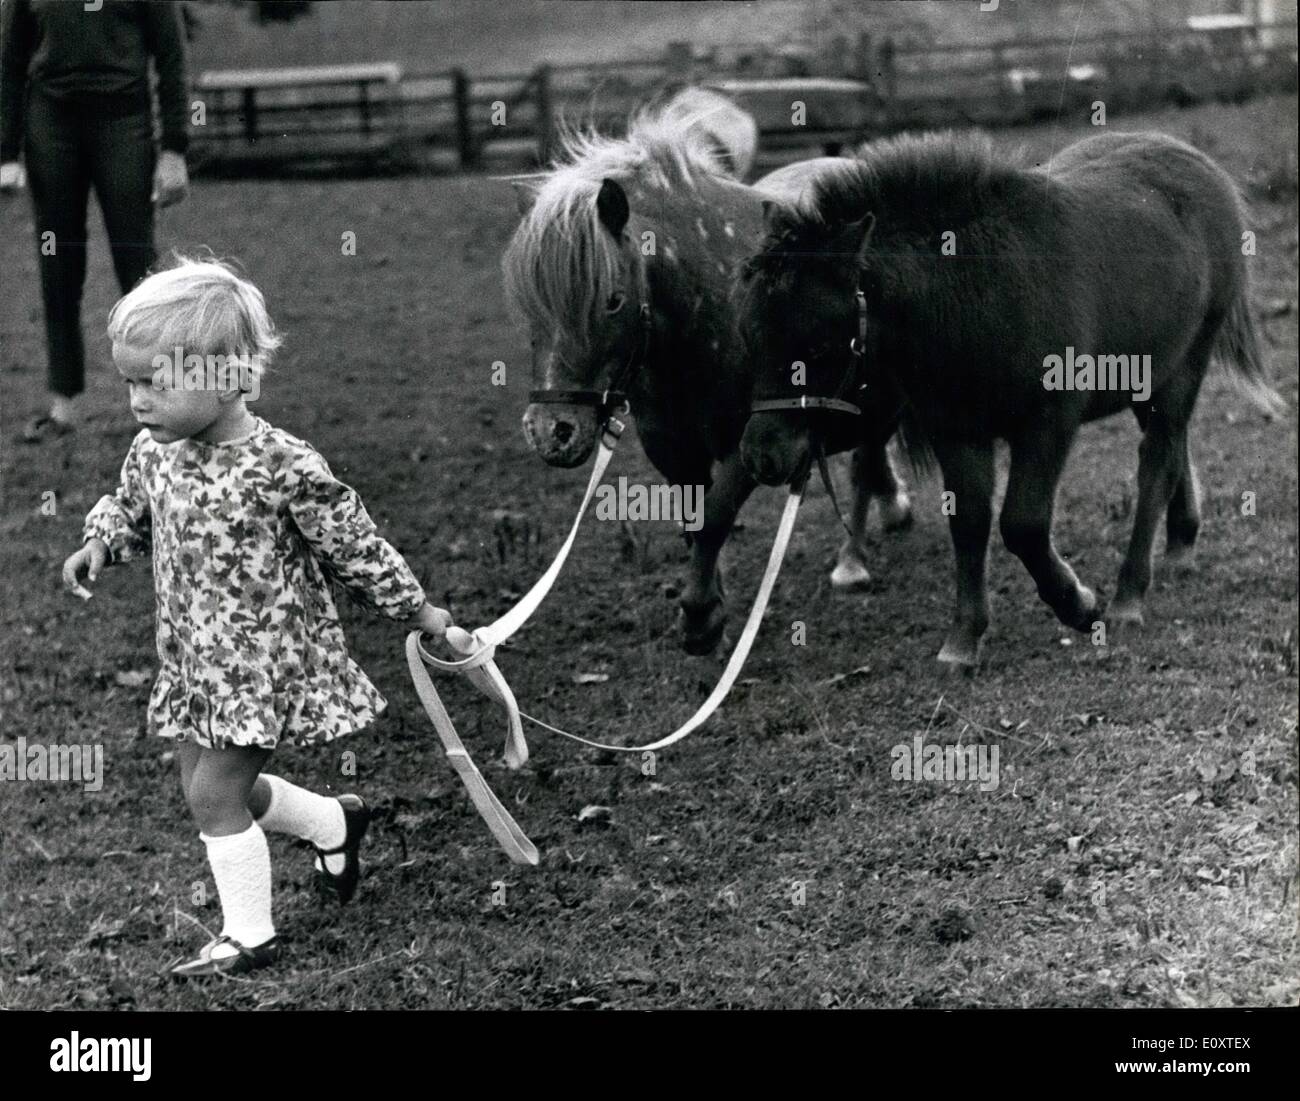 Sep. 09, 1967 - Miiget horese for the horse of the year show: It is the very latest in atatus symbols tiny Falabella horses which stend only waist high. Originally bred in Argentions. the breed is new to England, Now, Mrs. Shirley Marler, of Weston Underwood, clney, Buckinghemahire, is breading them from three mares and a stallion at 400 a foal. Next week, two of the Falabella the world's ansllest horses, will be on parade for the first time at the Horse of the year show at Wembley, London. Keystone photo shows Mrs Stock Photo